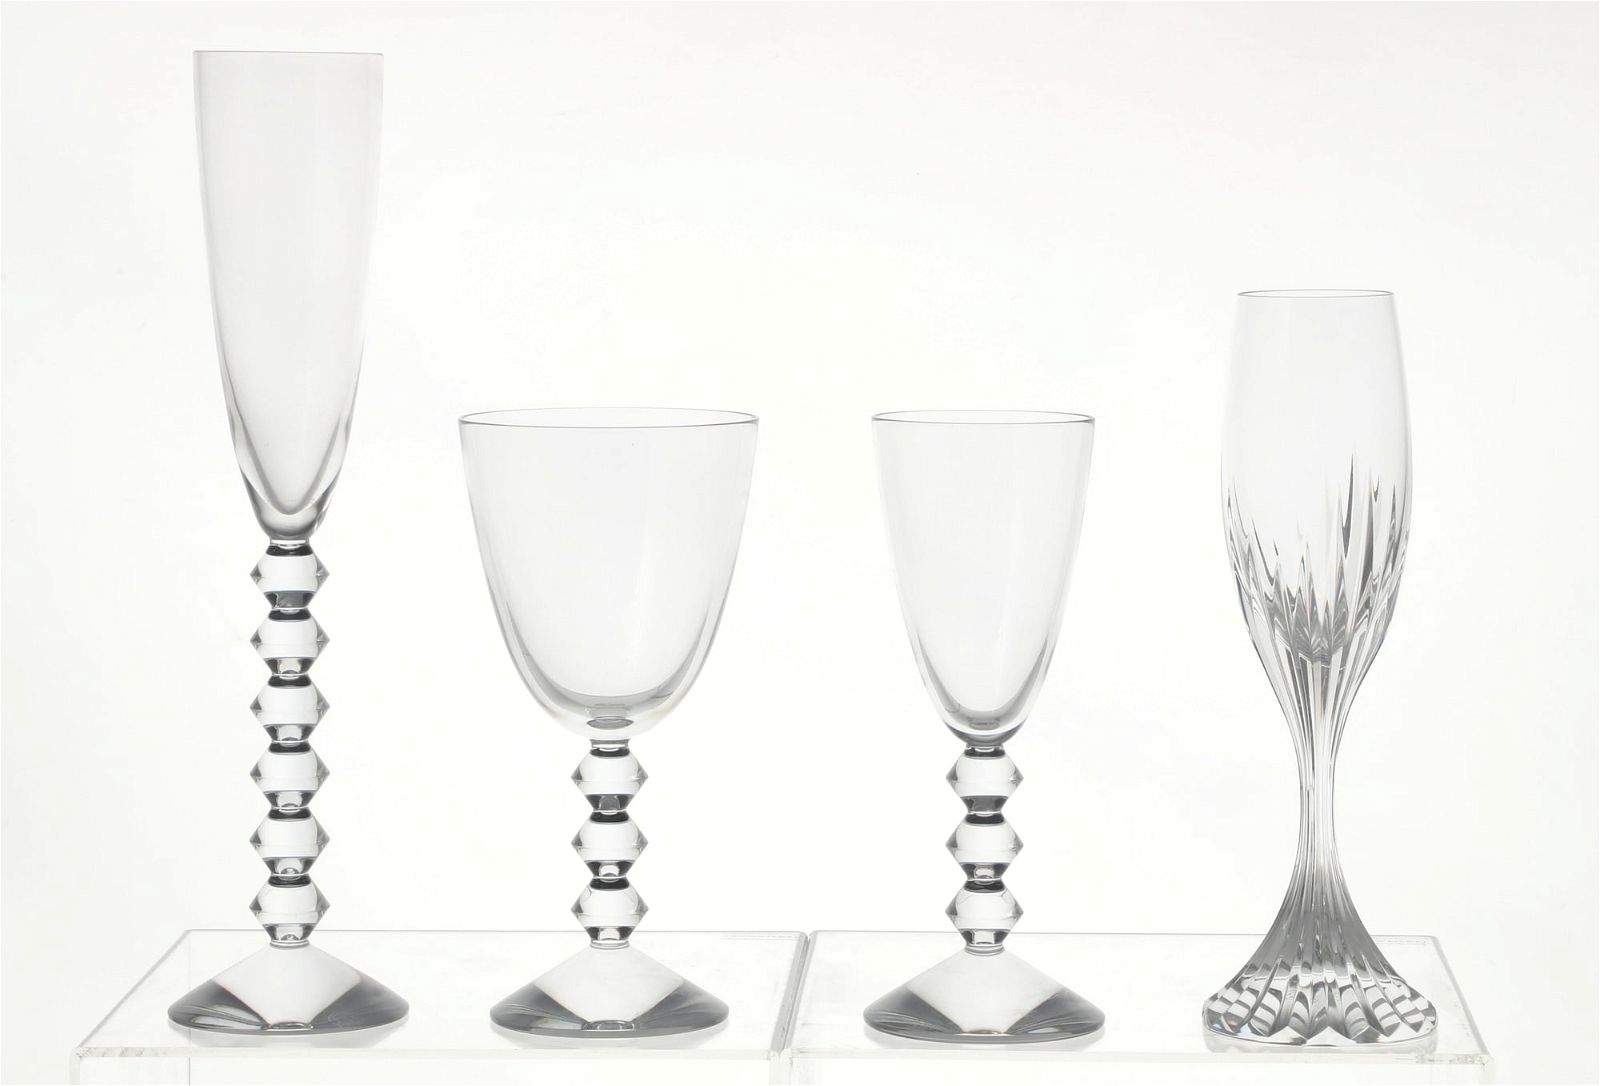 A SUITE BACCARAT CLEAR GLASS CHAMPAGNE 2fb41f8